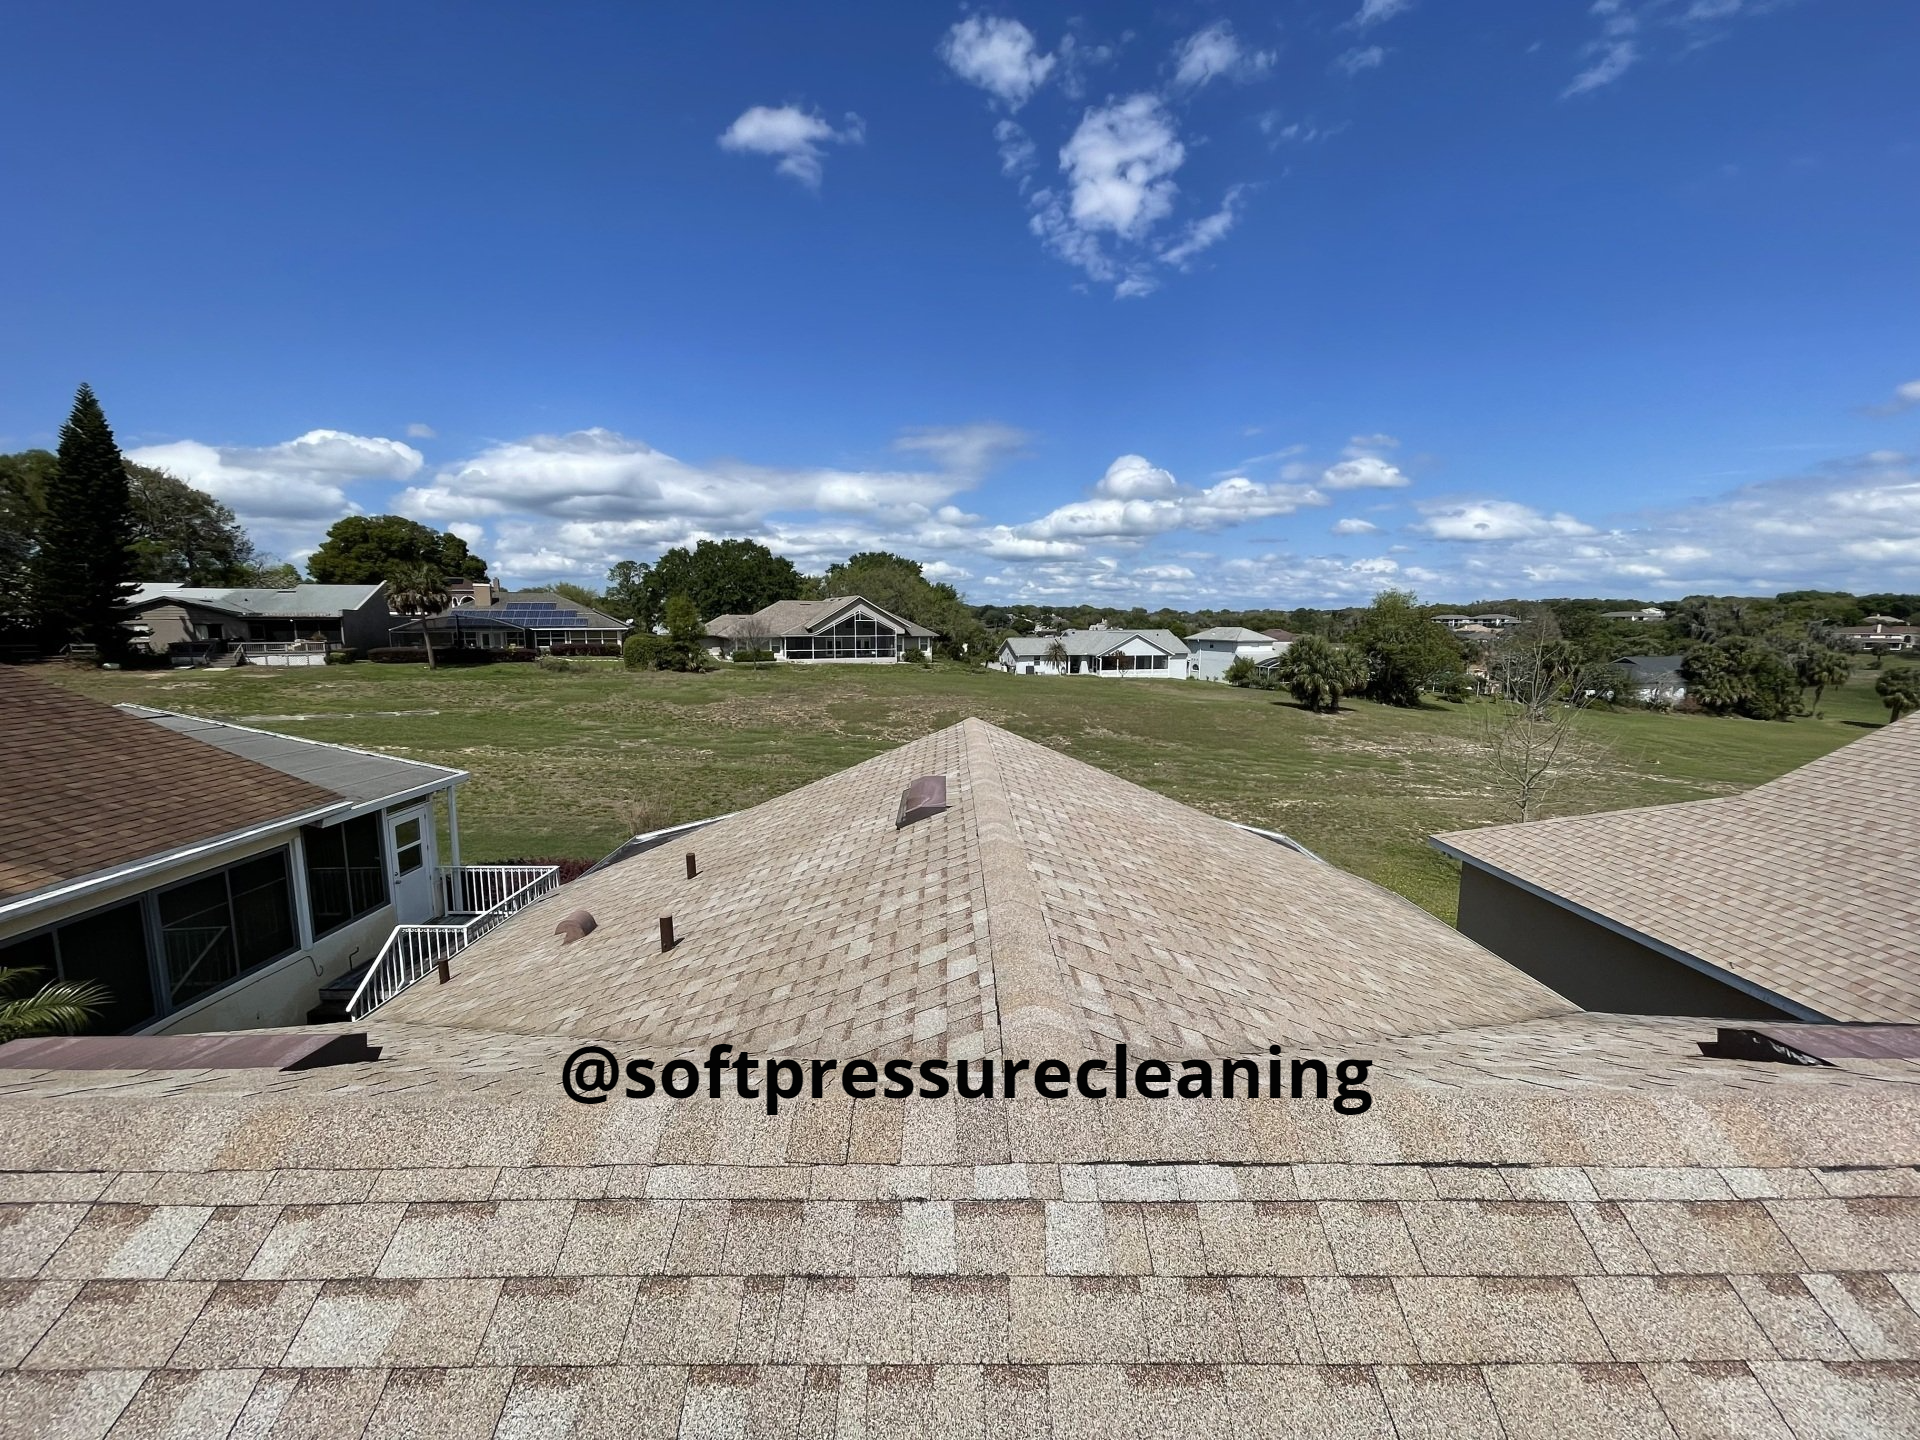 Safe and reliable roof cleaning in Altamonte Springs, Florida